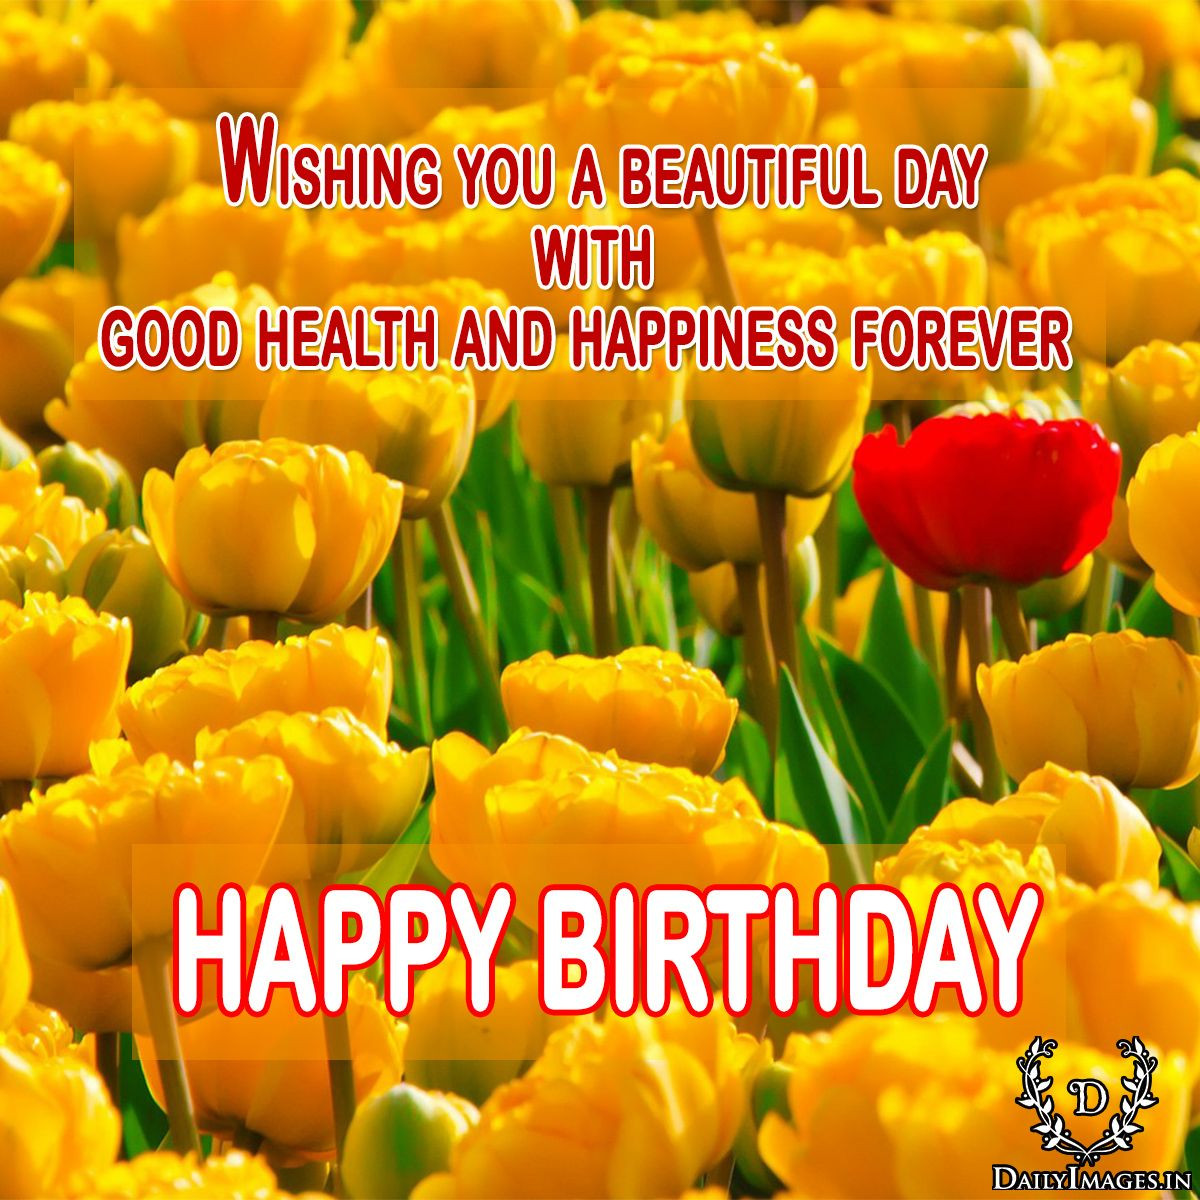 Birthday Wishes For Good Health
 Wishing you a beautiful day with good health and happiness